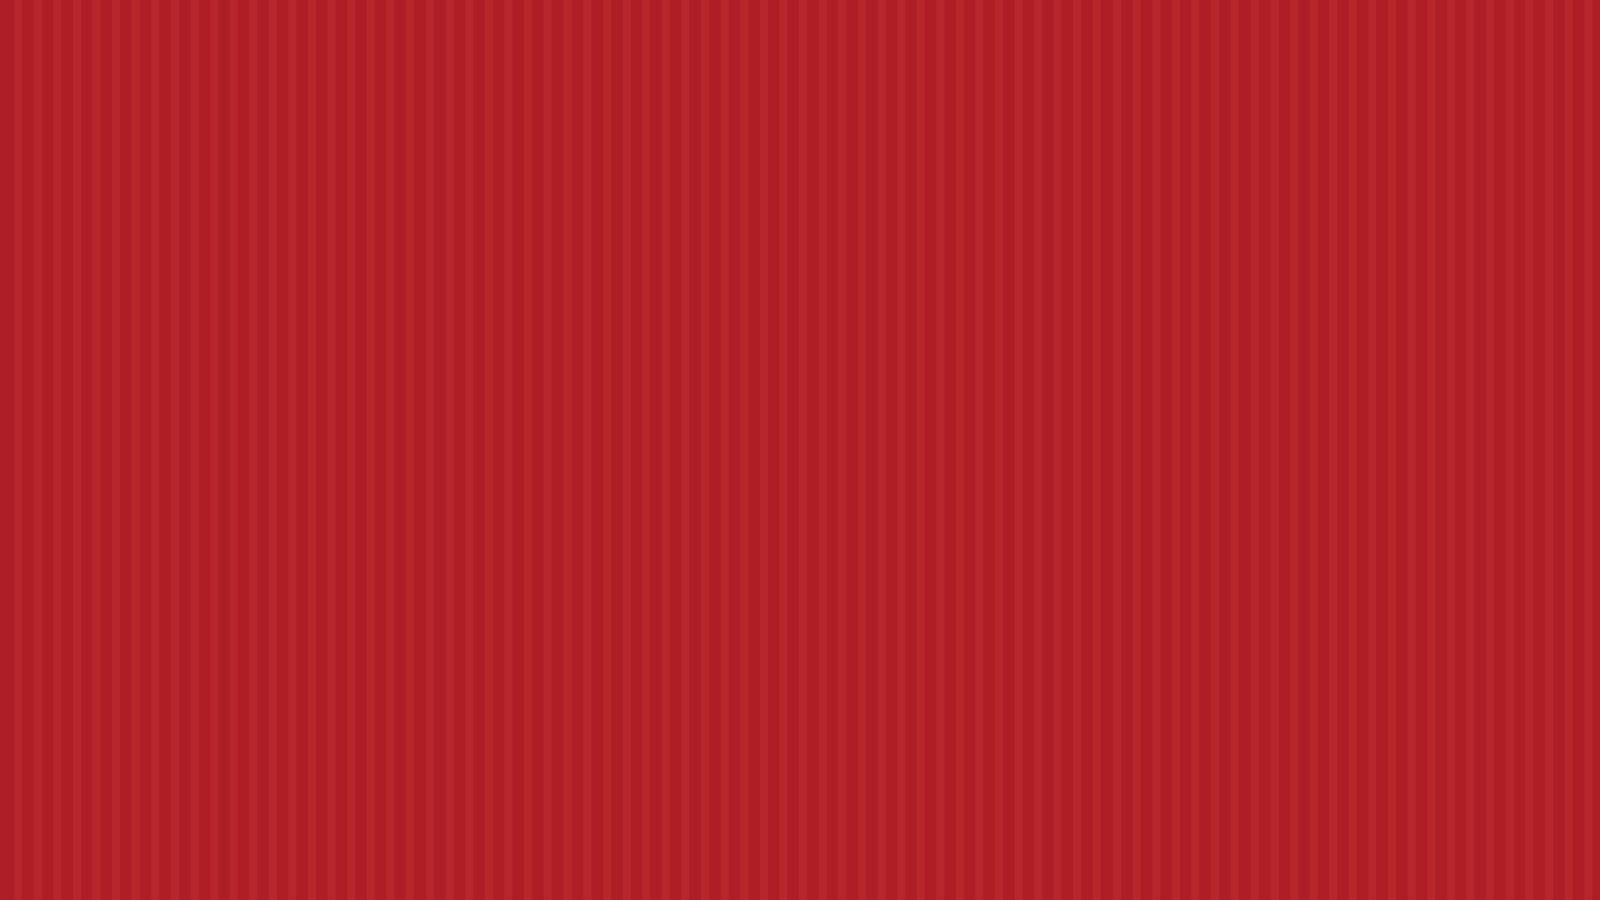 Solid Red Backgrounds   HD Wallpapers 1600x900